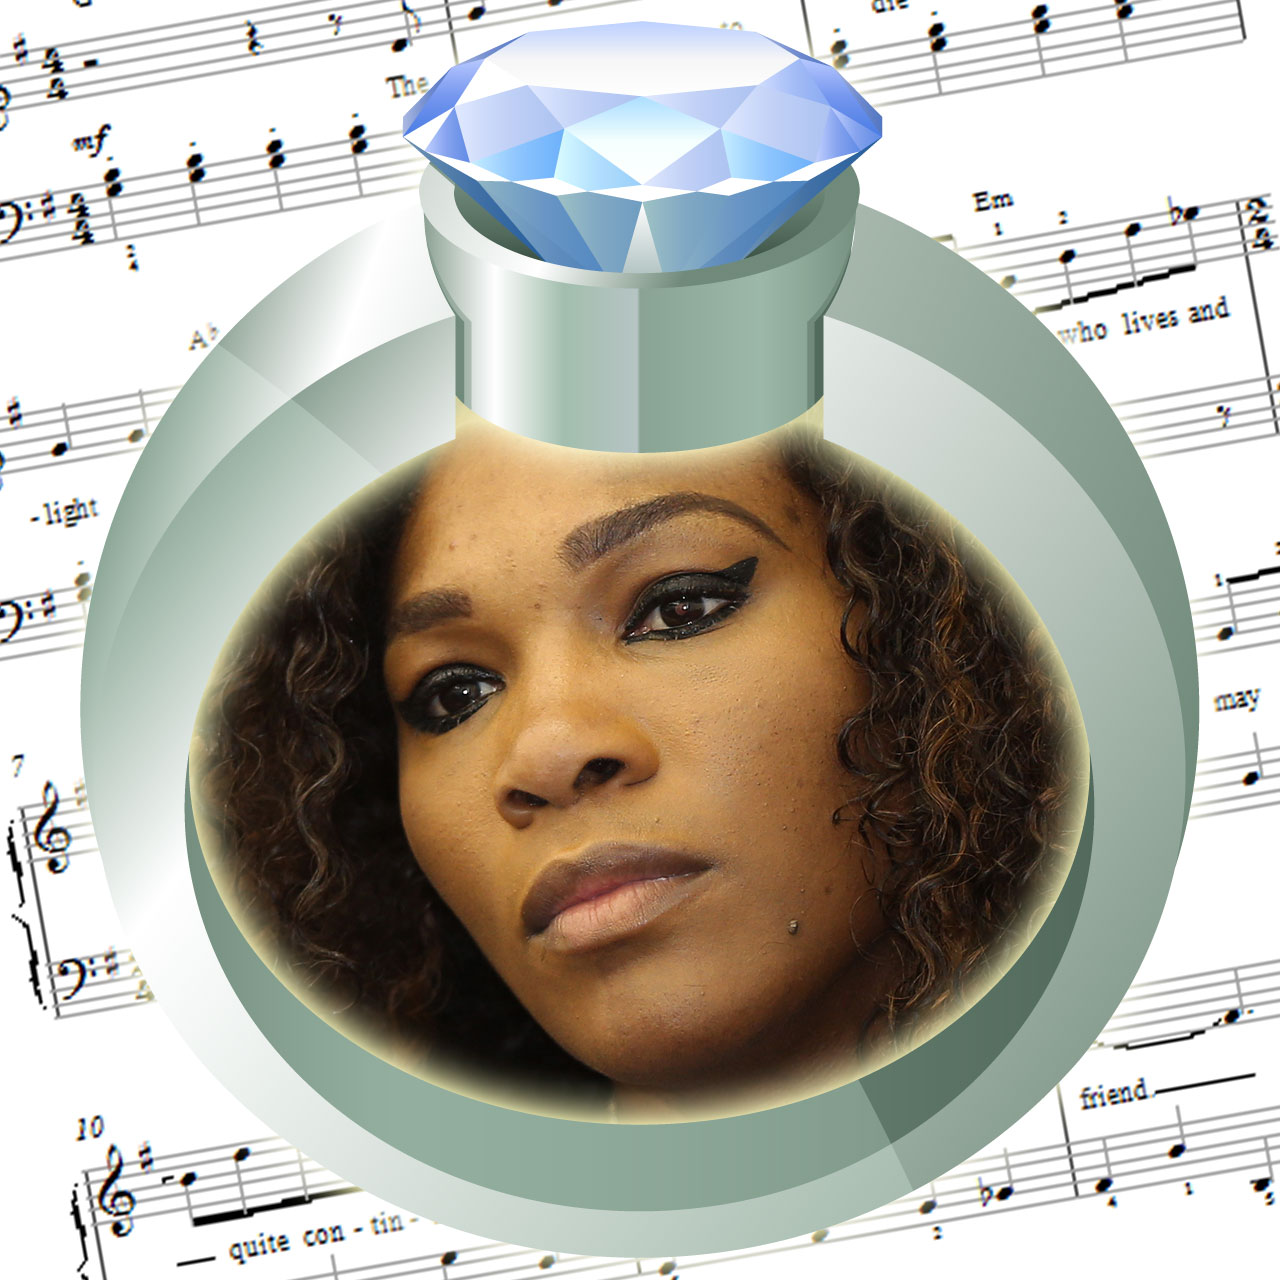 Serena Williams performs karaoke version of "Diamonds Are A Girl's Best Friend".